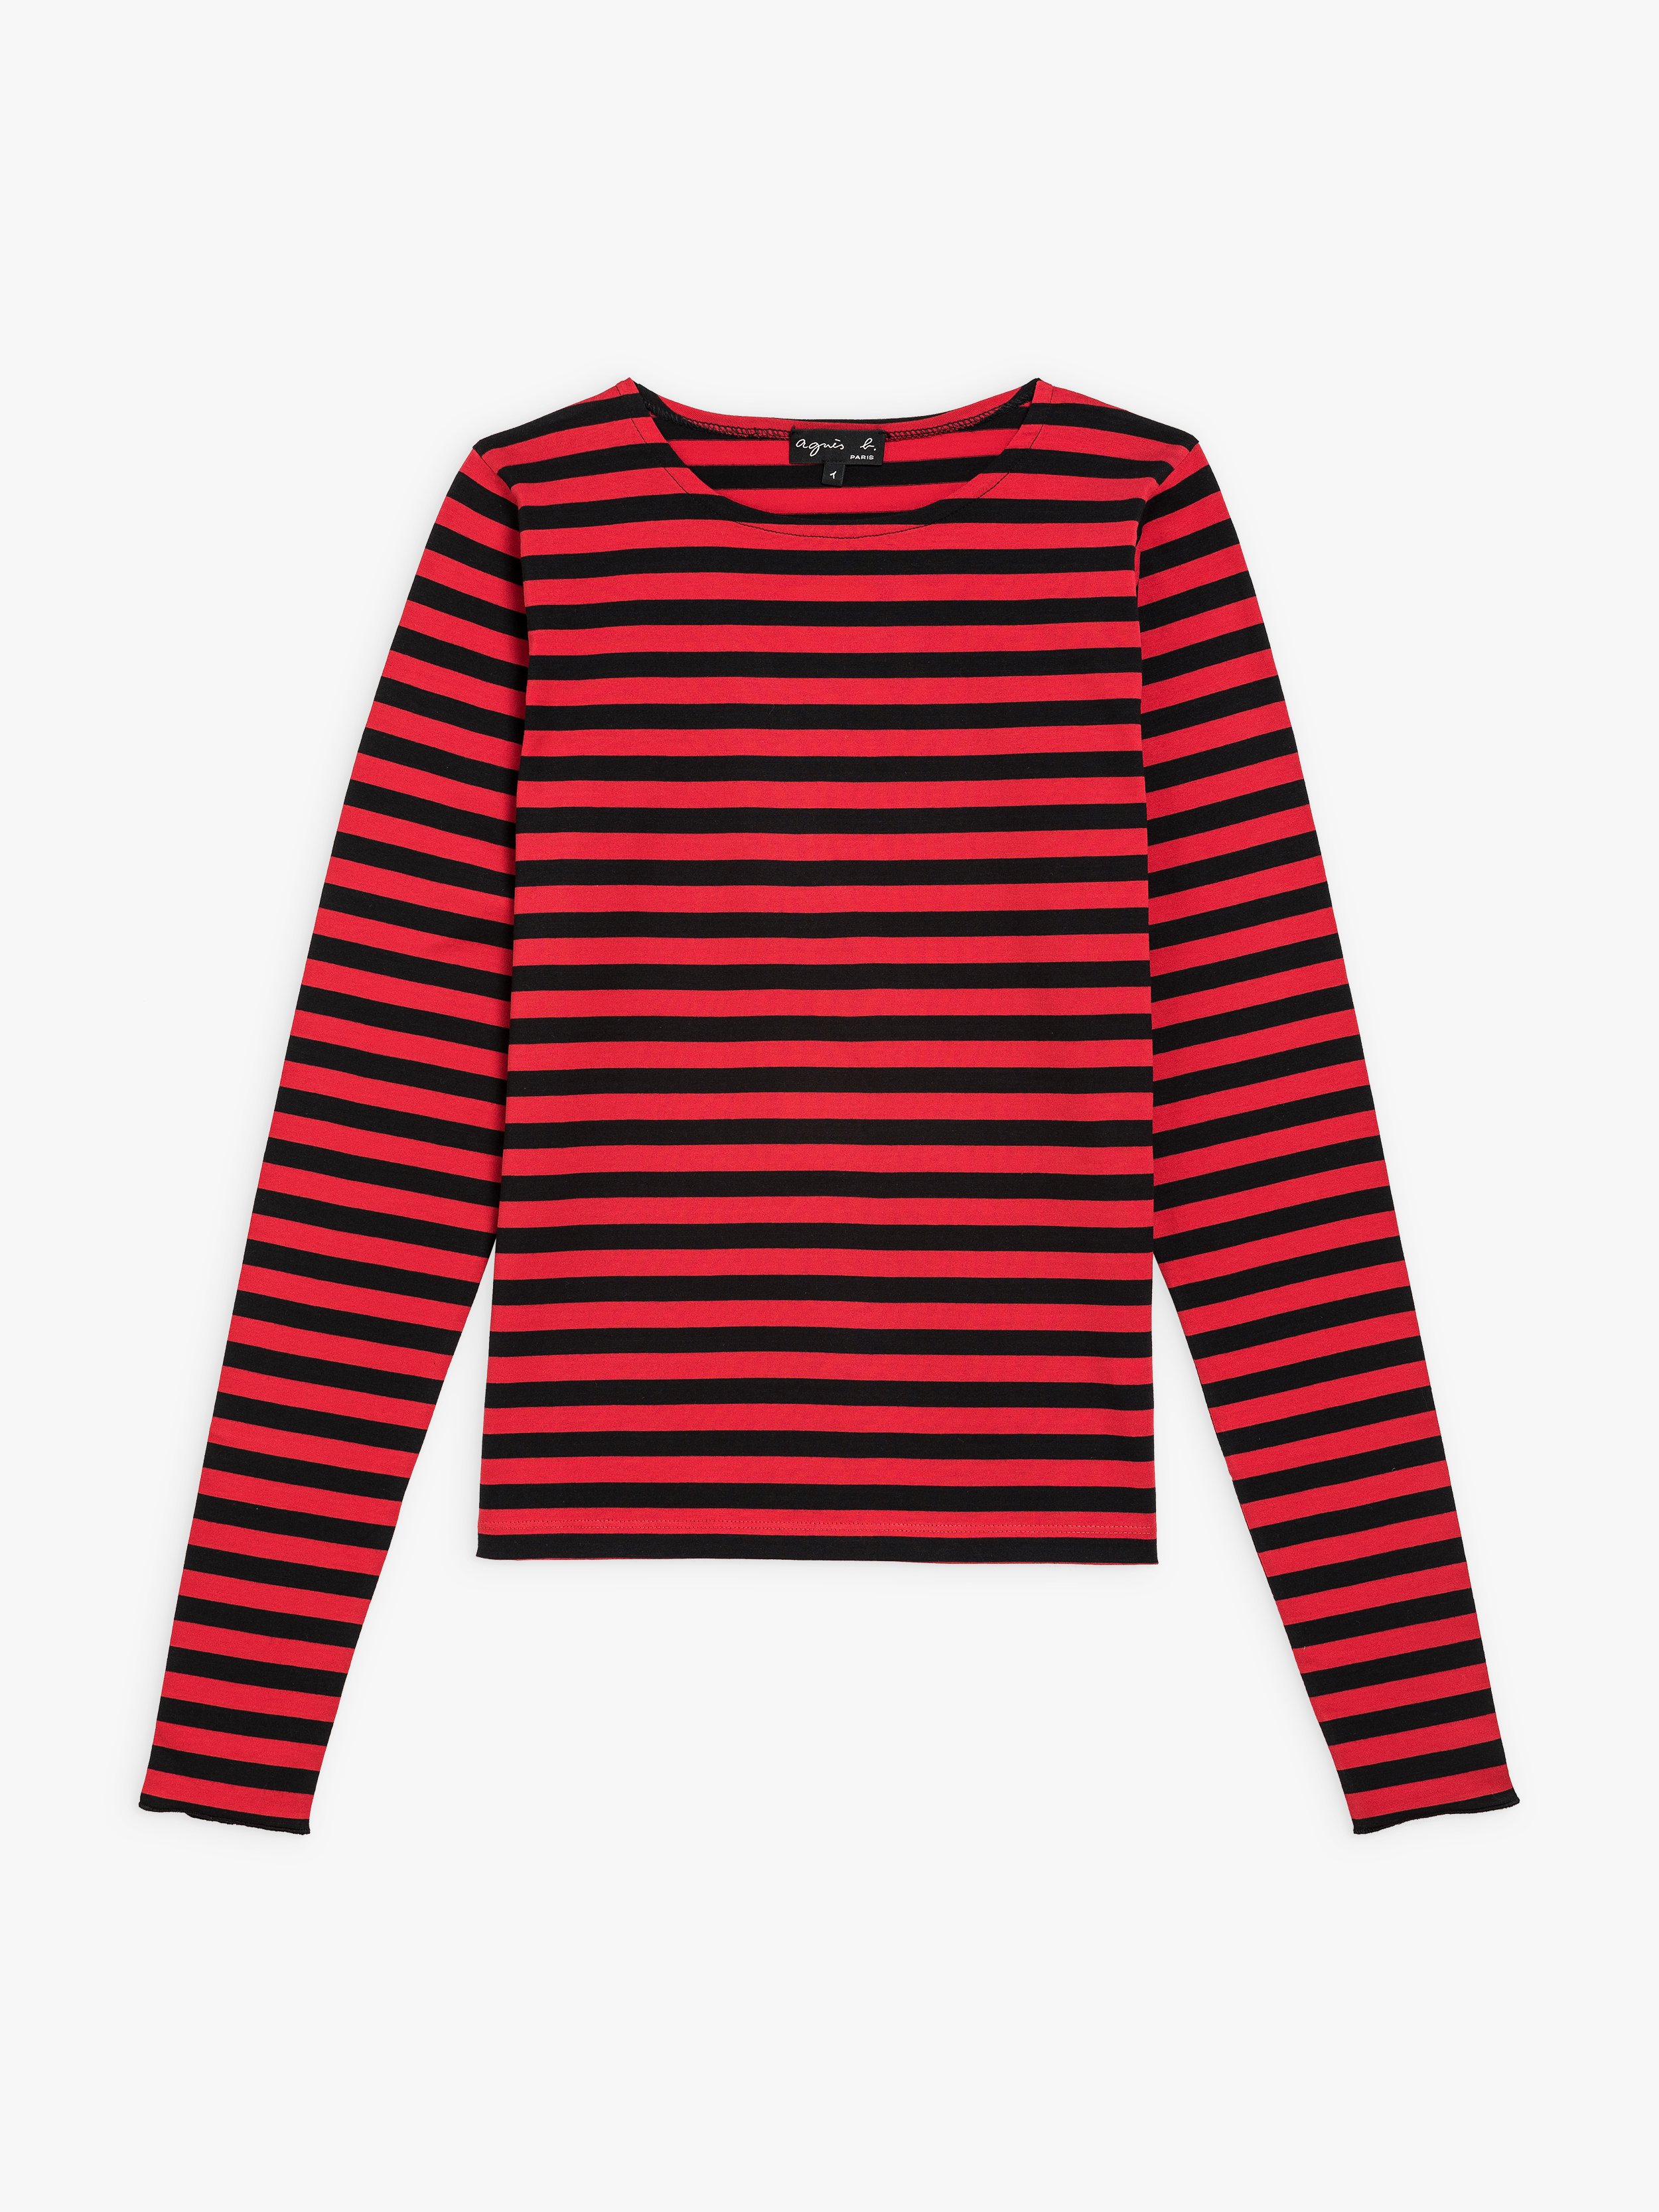 striped shirt red and black